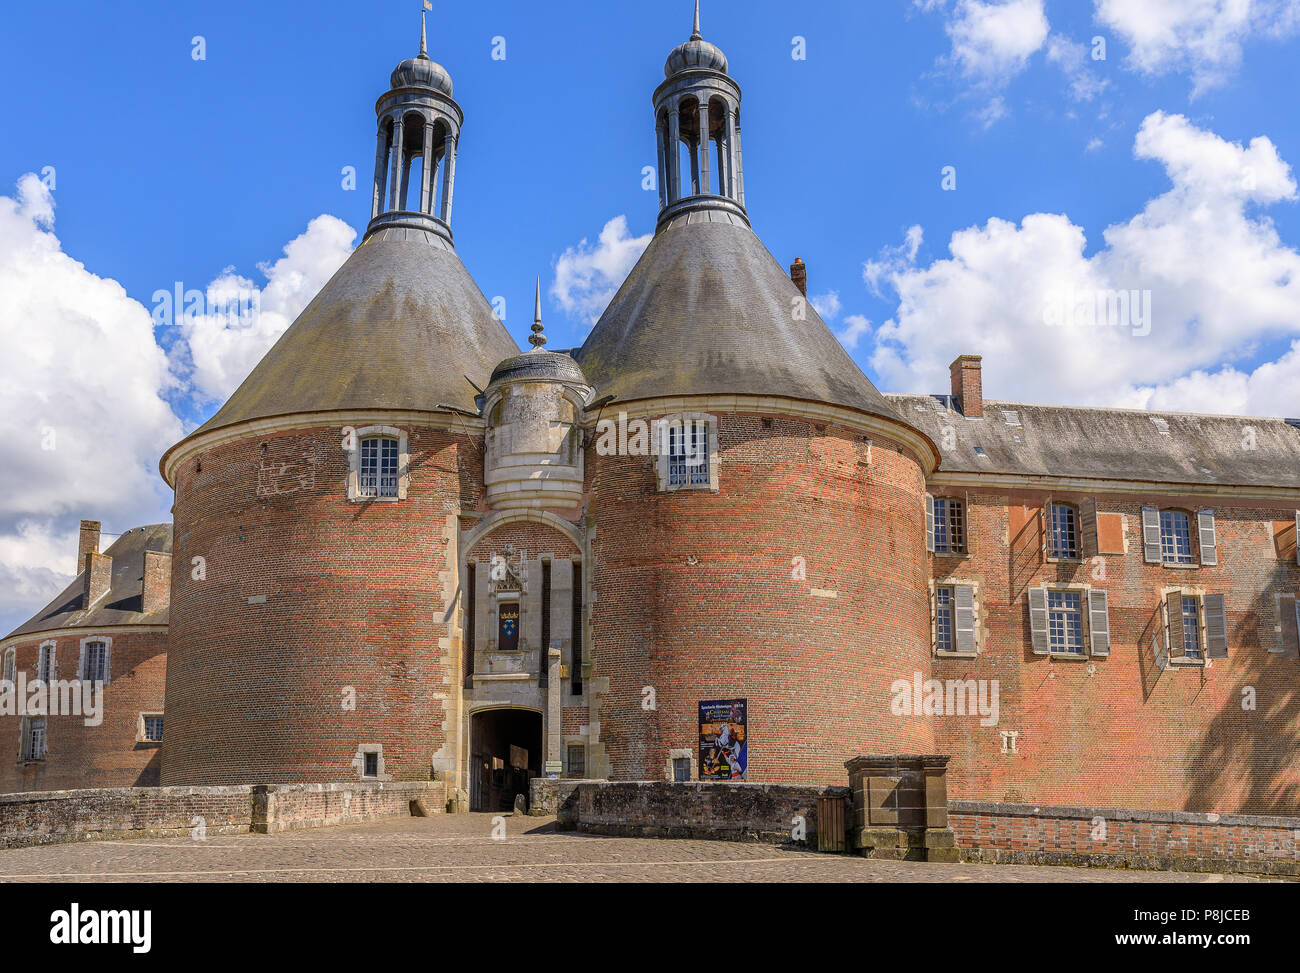 Saint Fargeau High Resolution Stock Photography and Images - Alamy